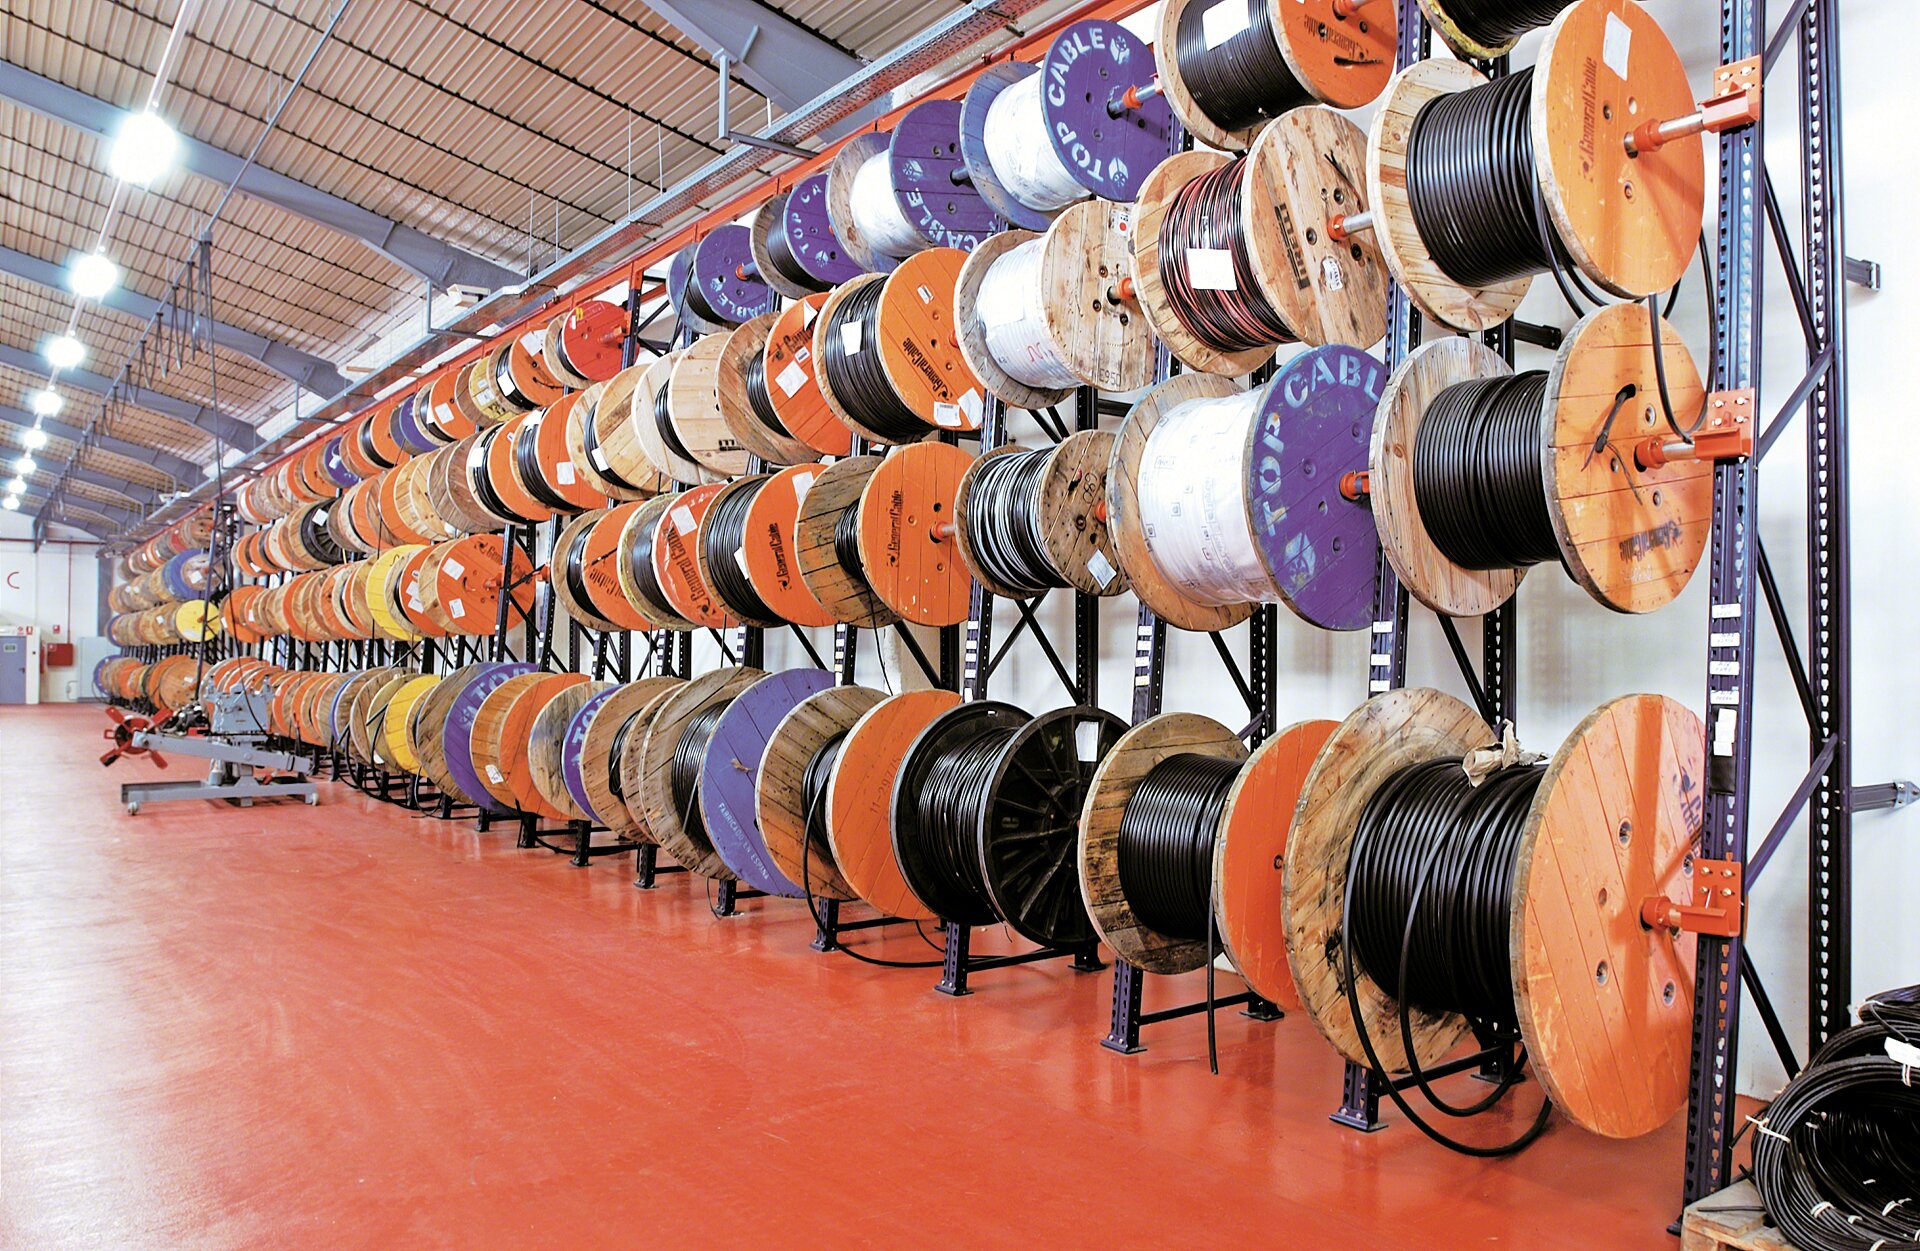 The metallic racks let reels of electrical and steel cable to be stored